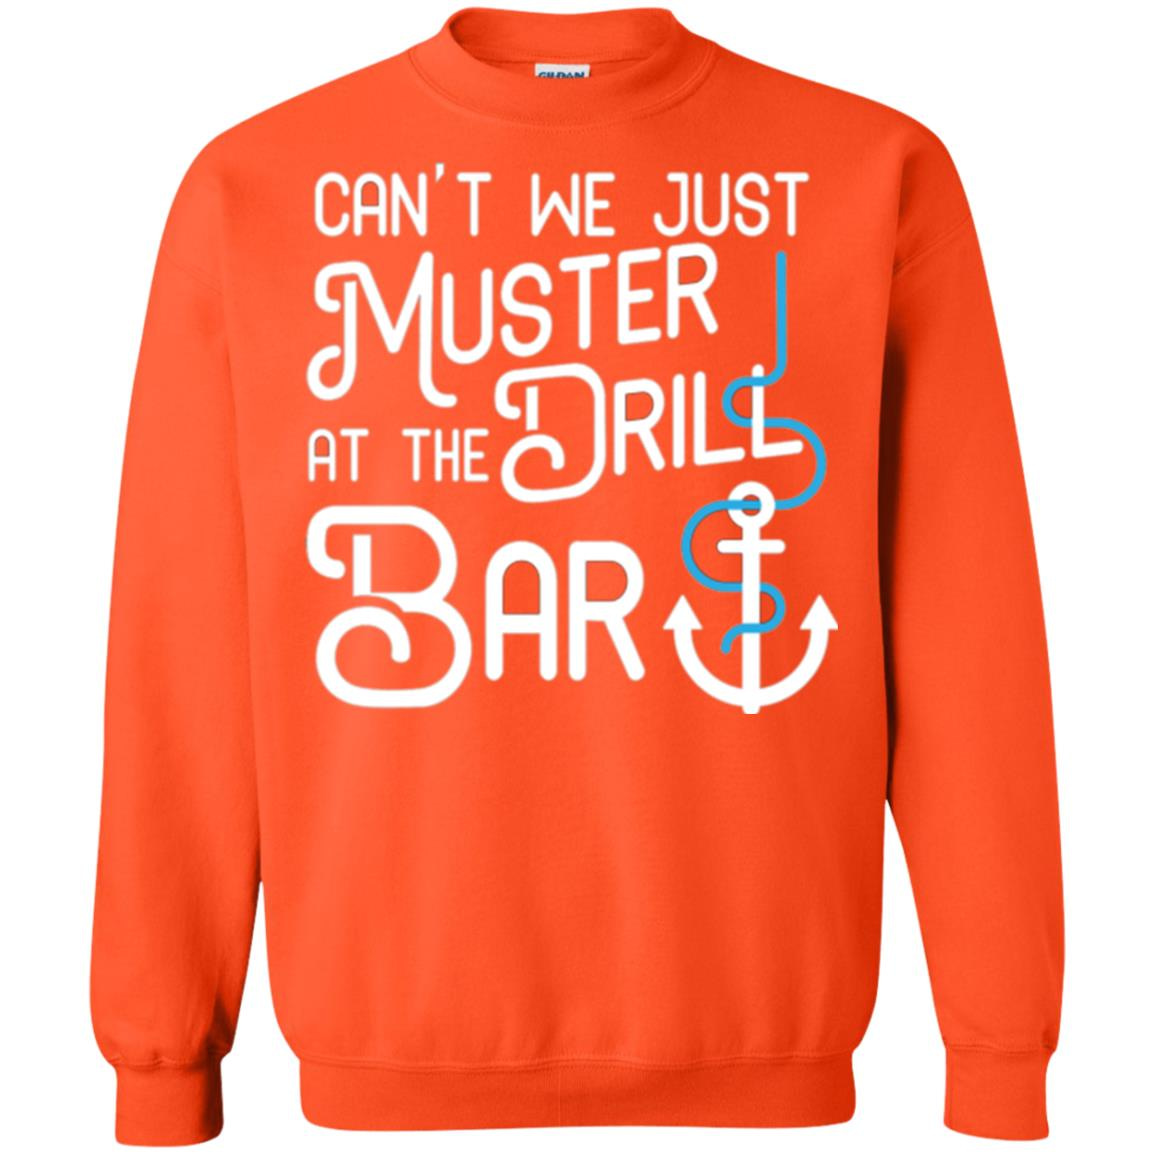 Inktee Store - Funny Cruise T Shirt Muster Drill At The Bar Sweatshirt Image